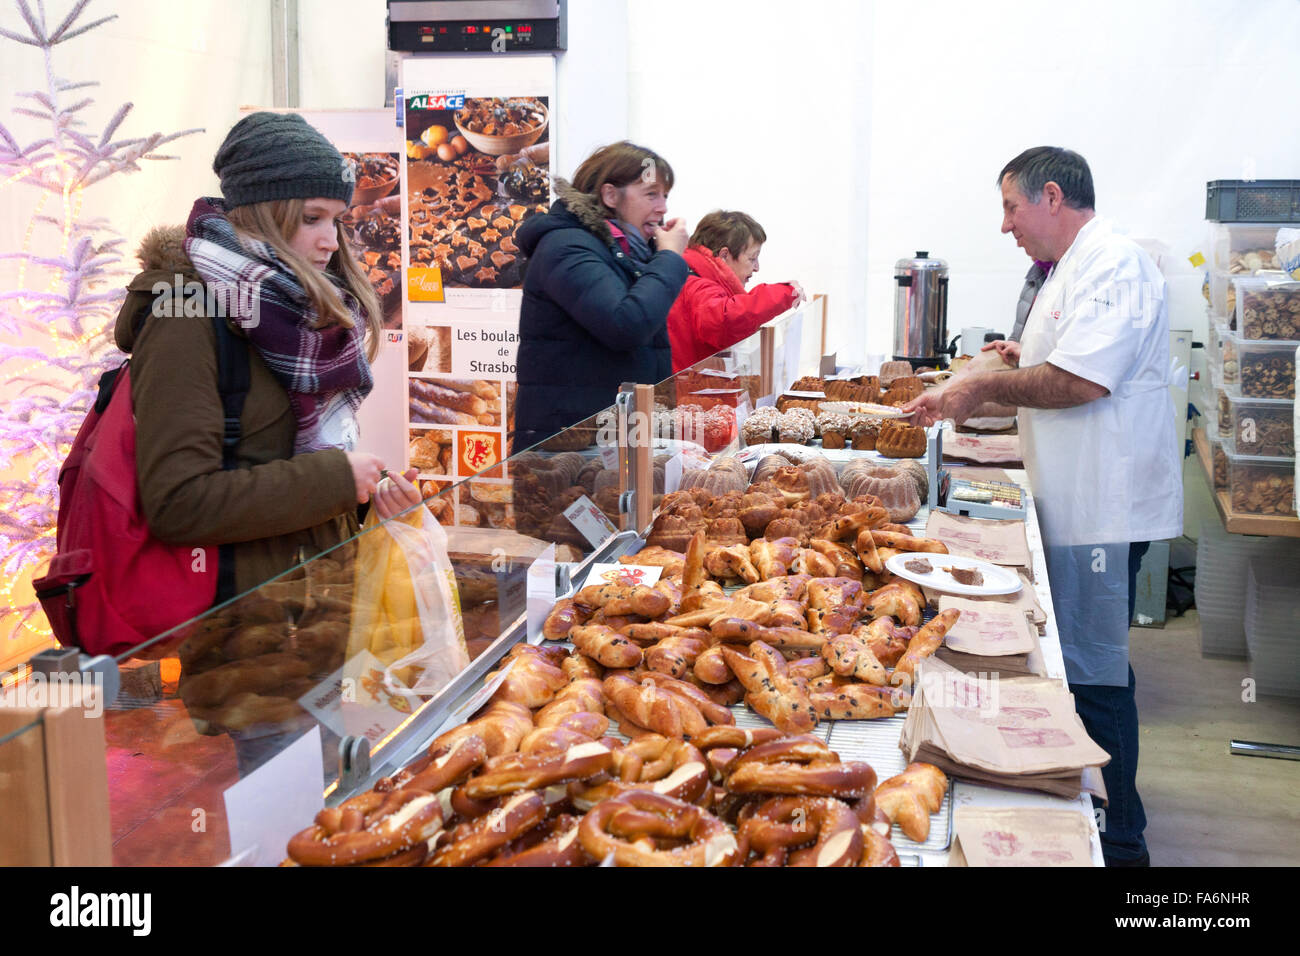 Women shopping for bread in a bakery at christmas; Strasbourg, Alsace, France Europe Stock Photo